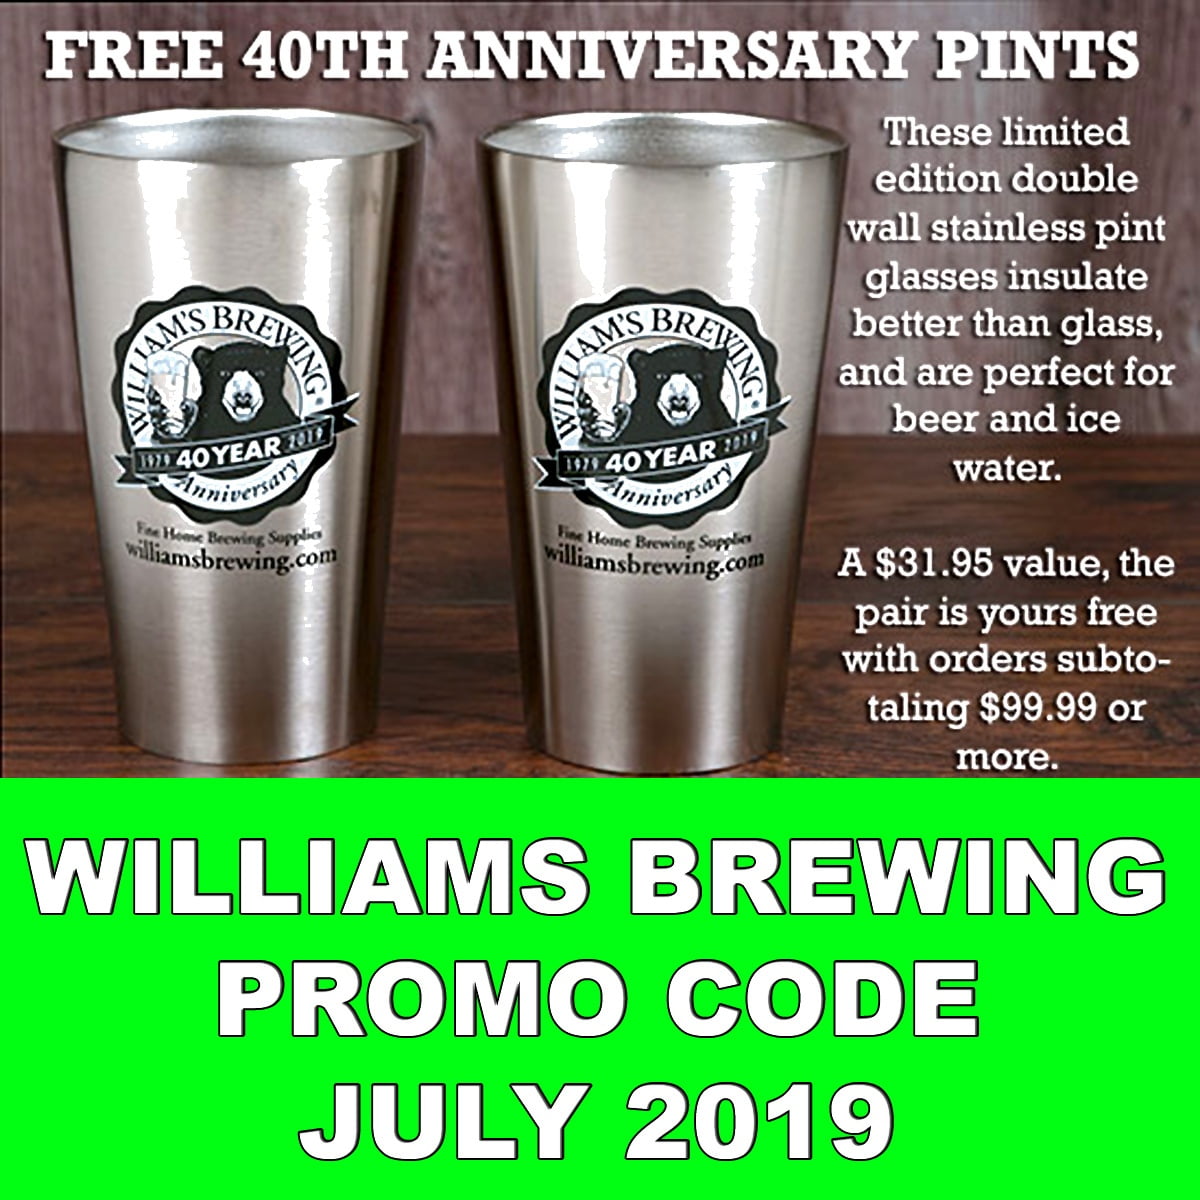 Get 2 Free Stainless Steel Insulated Pint Glasses with this Williams Brewing Promo Code